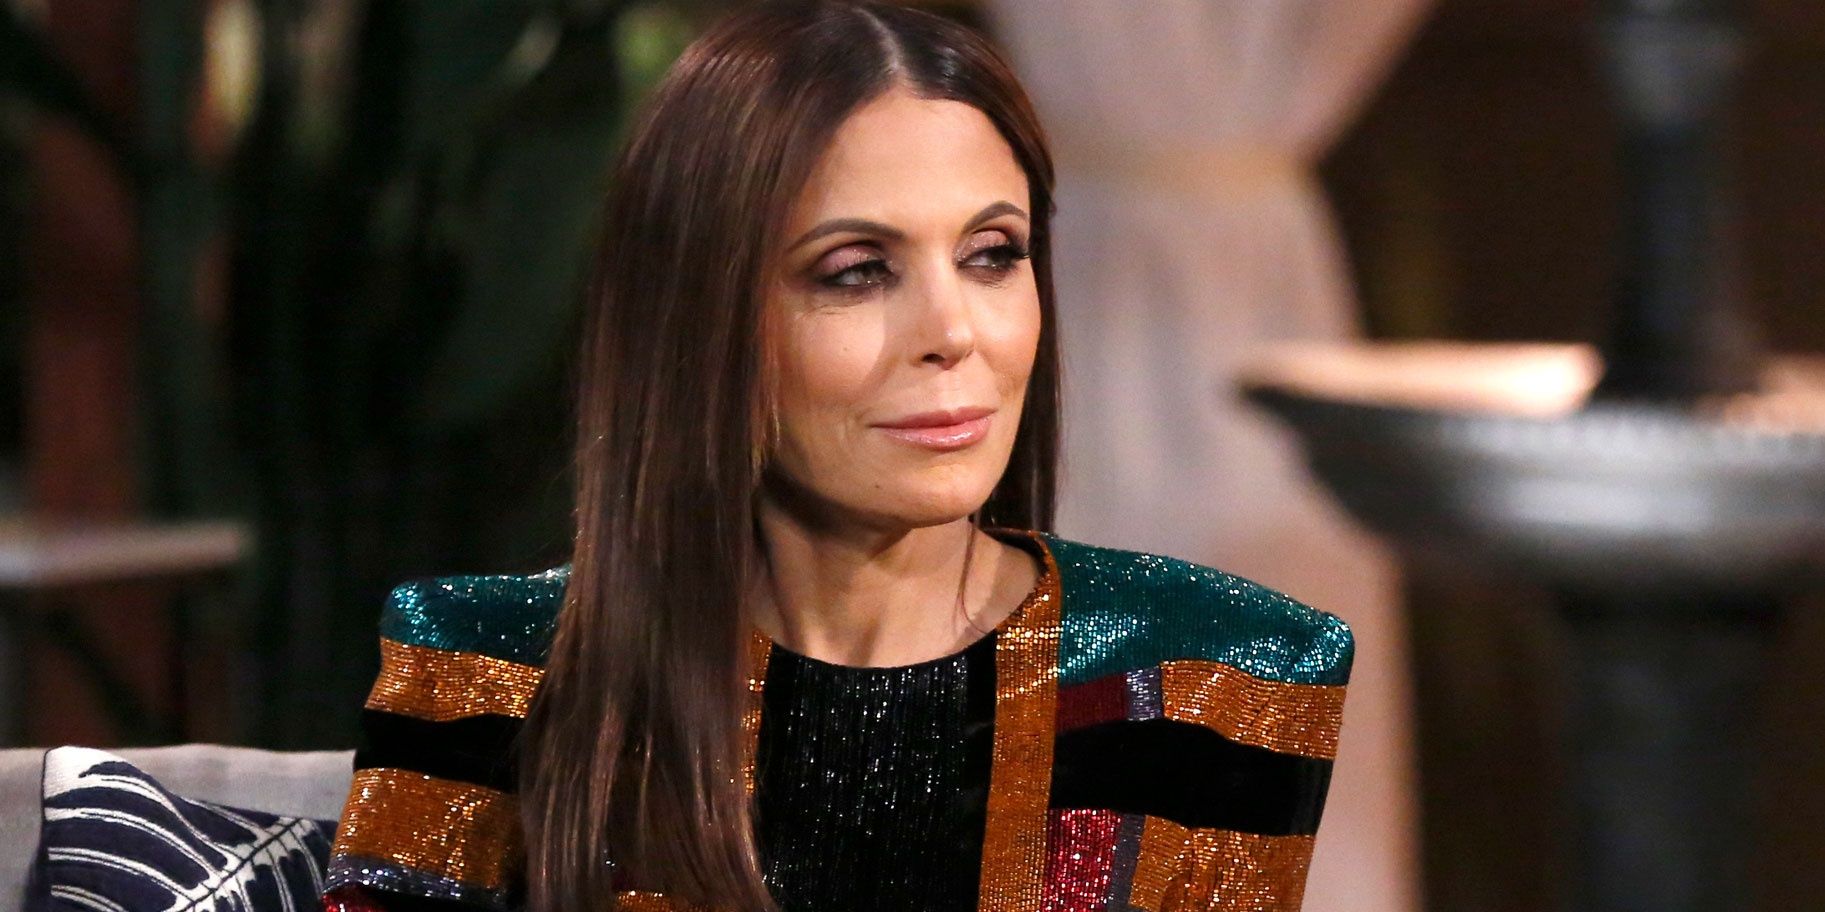 Bethenny Frankel on The Real Housewives of New York City